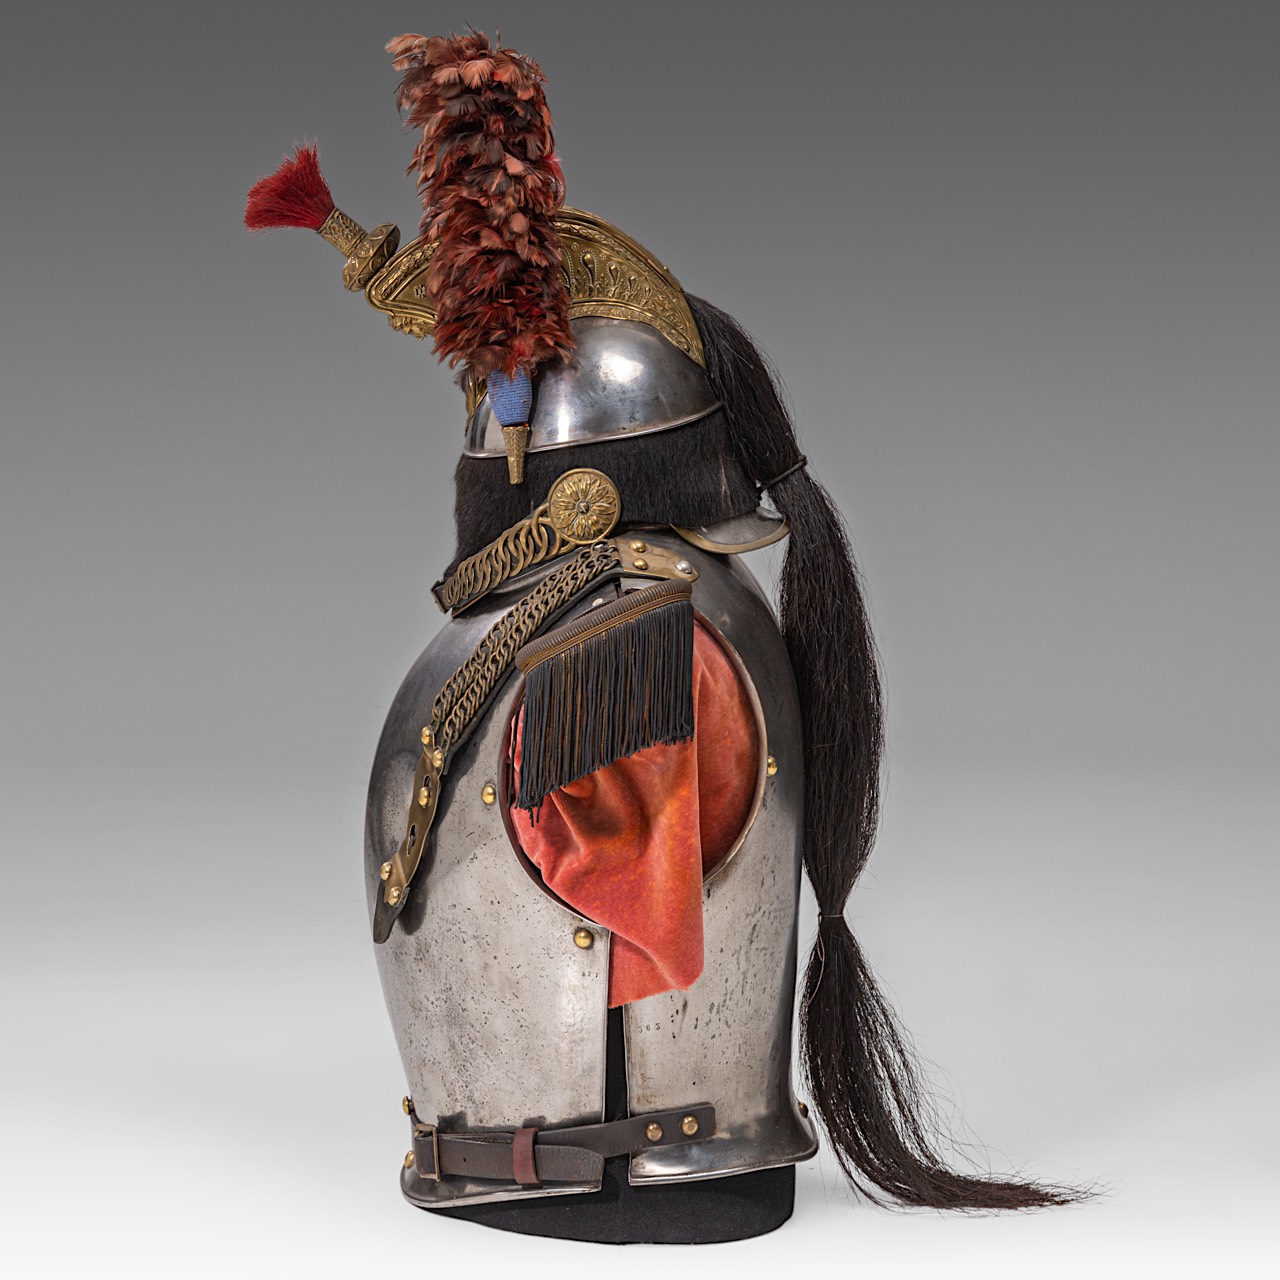 Cuirass and helmet ,metal and guilded brass, 1855, 88 x 42 x 54 cm. (34.6 x 16.5 x 21.2 in.) - Image 3 of 6